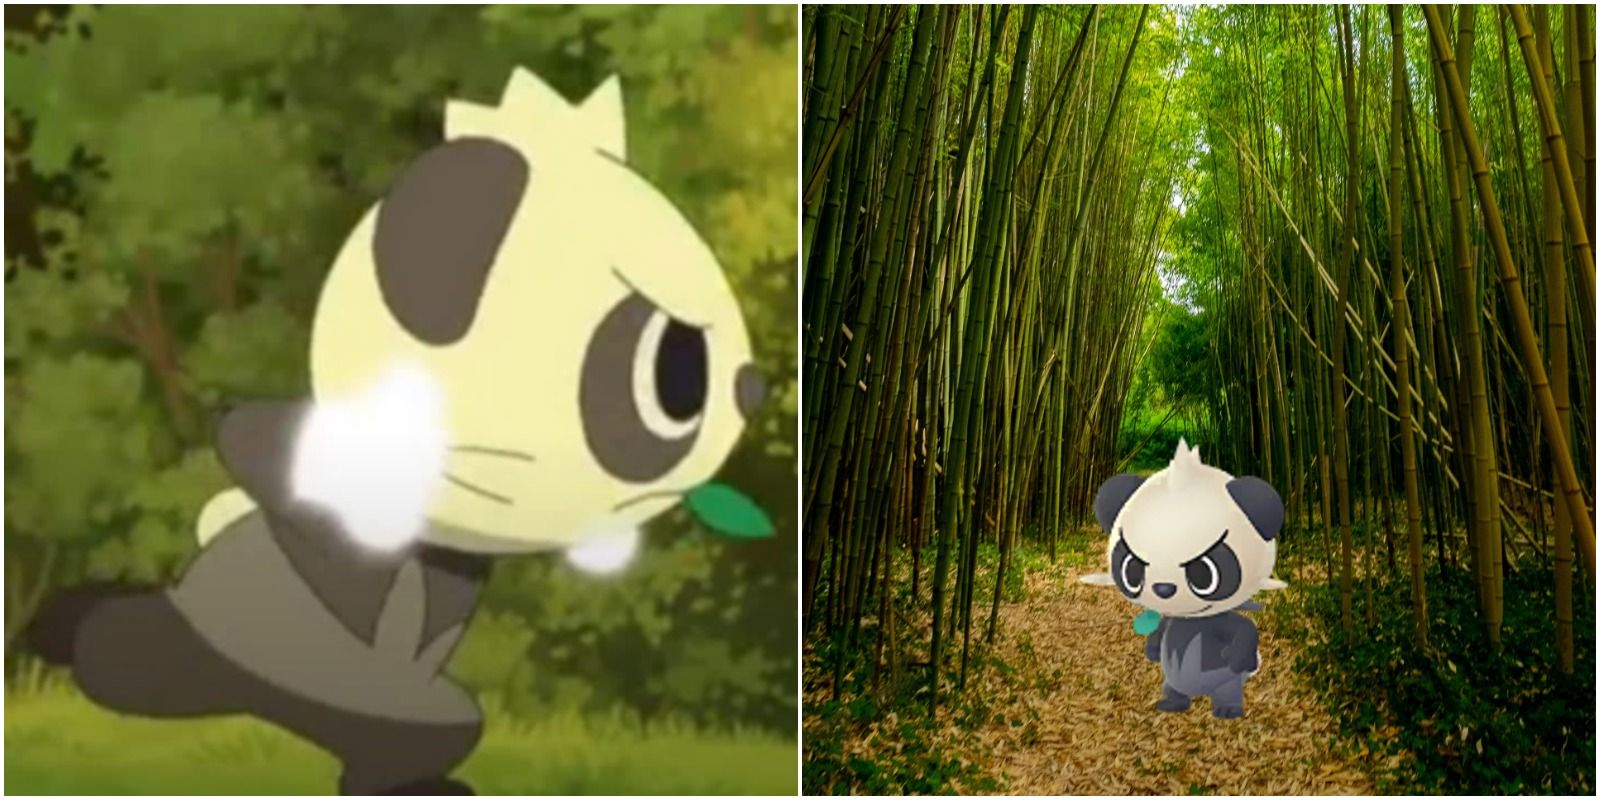 feature image pokemon go pancham best move guide pancham in anime using an attack and pancham in pokemon go in a bamboo forest